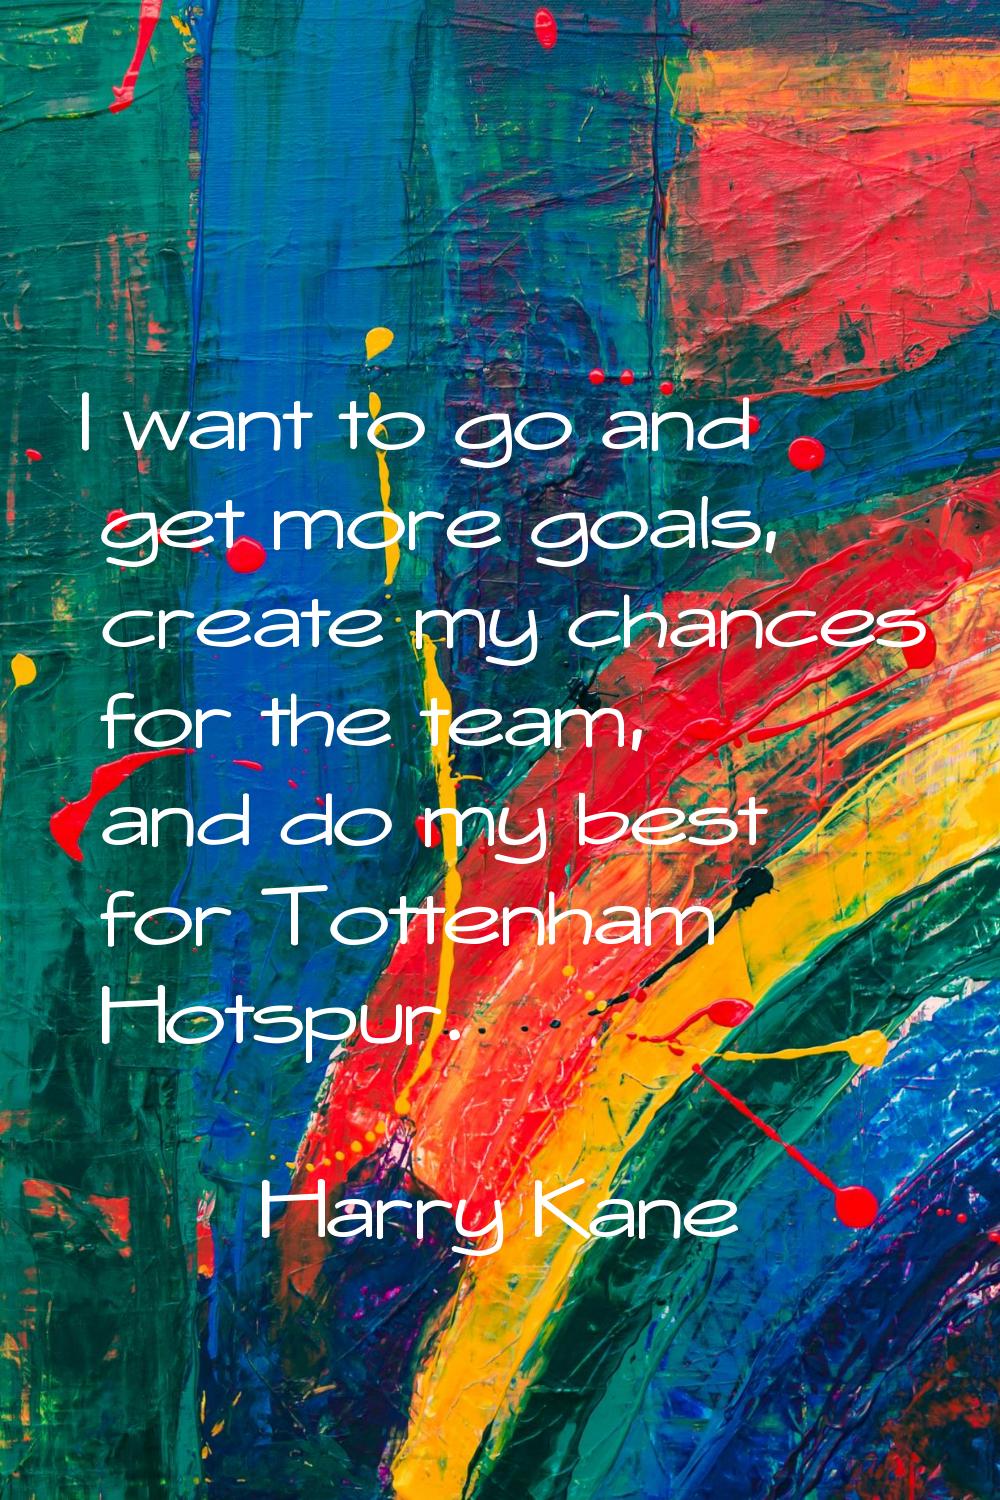 I want to go and get more goals, create my chances for the team, and do my best for Tottenham Hotsp